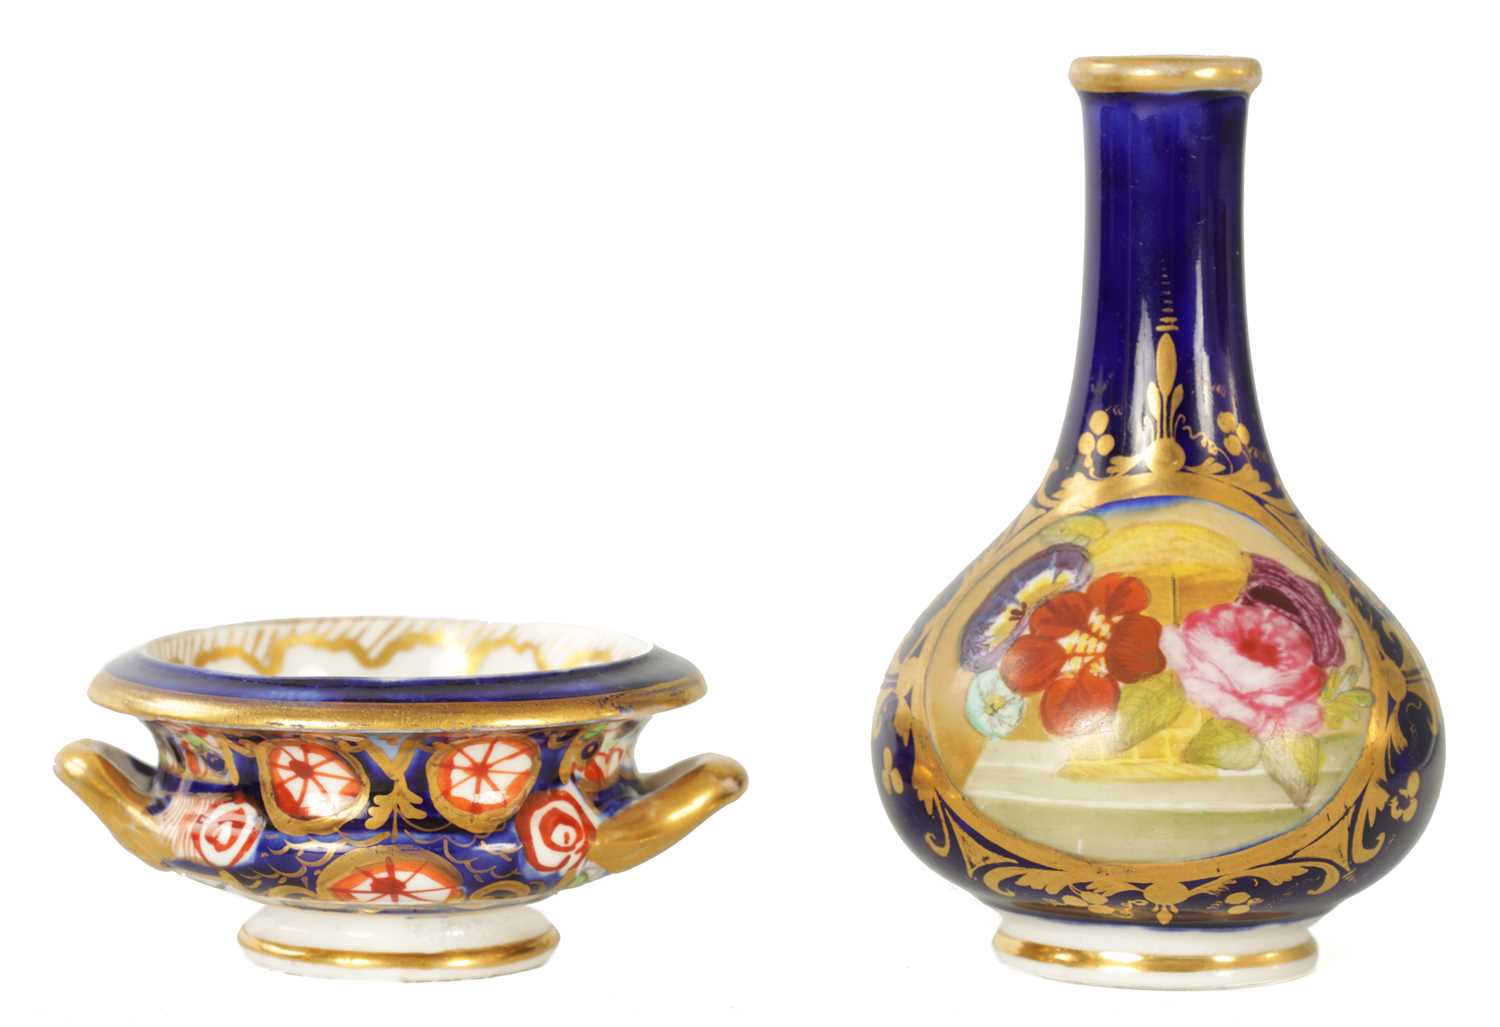 Lot 65 - TWO EARLY 19TH CENTURY PORCELAIN DERBY (WILLIAM DUESBURY & CO) MINIATURES